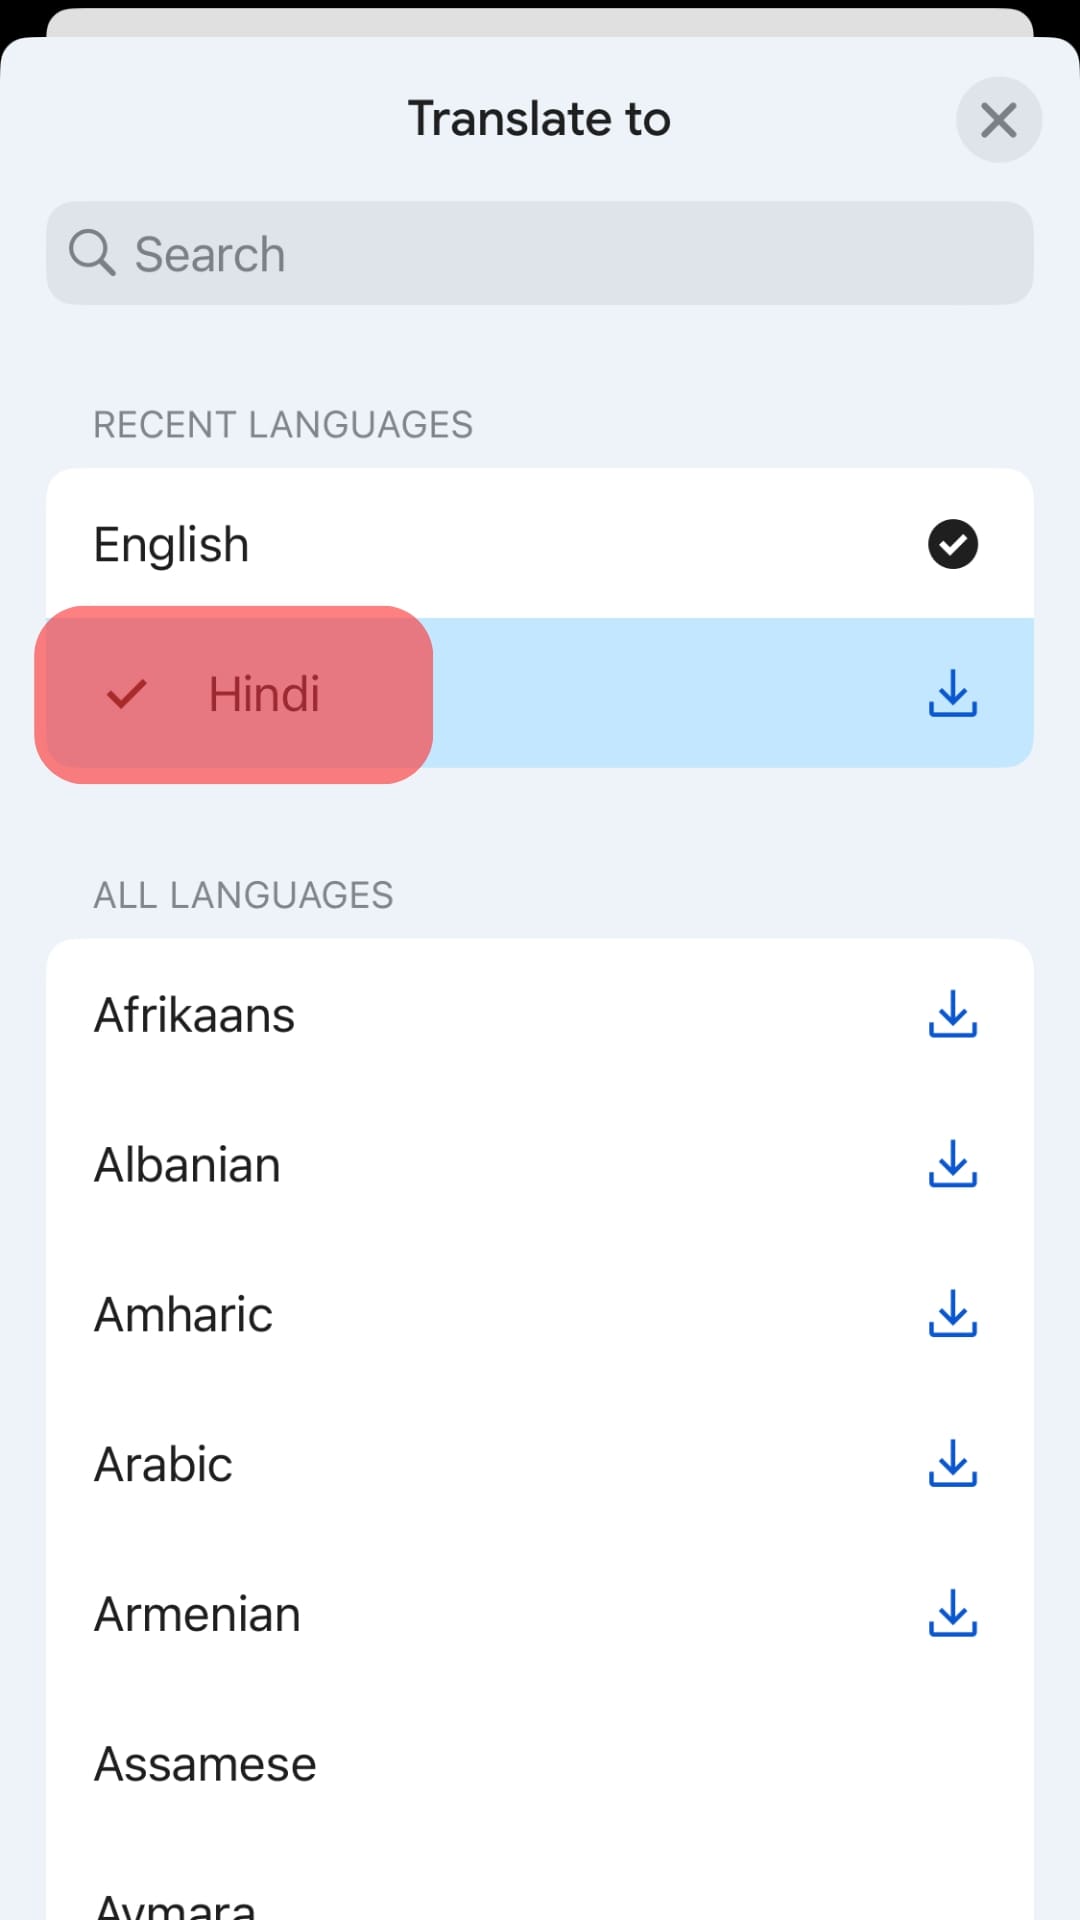 Select The Language You Wish To Convert To.